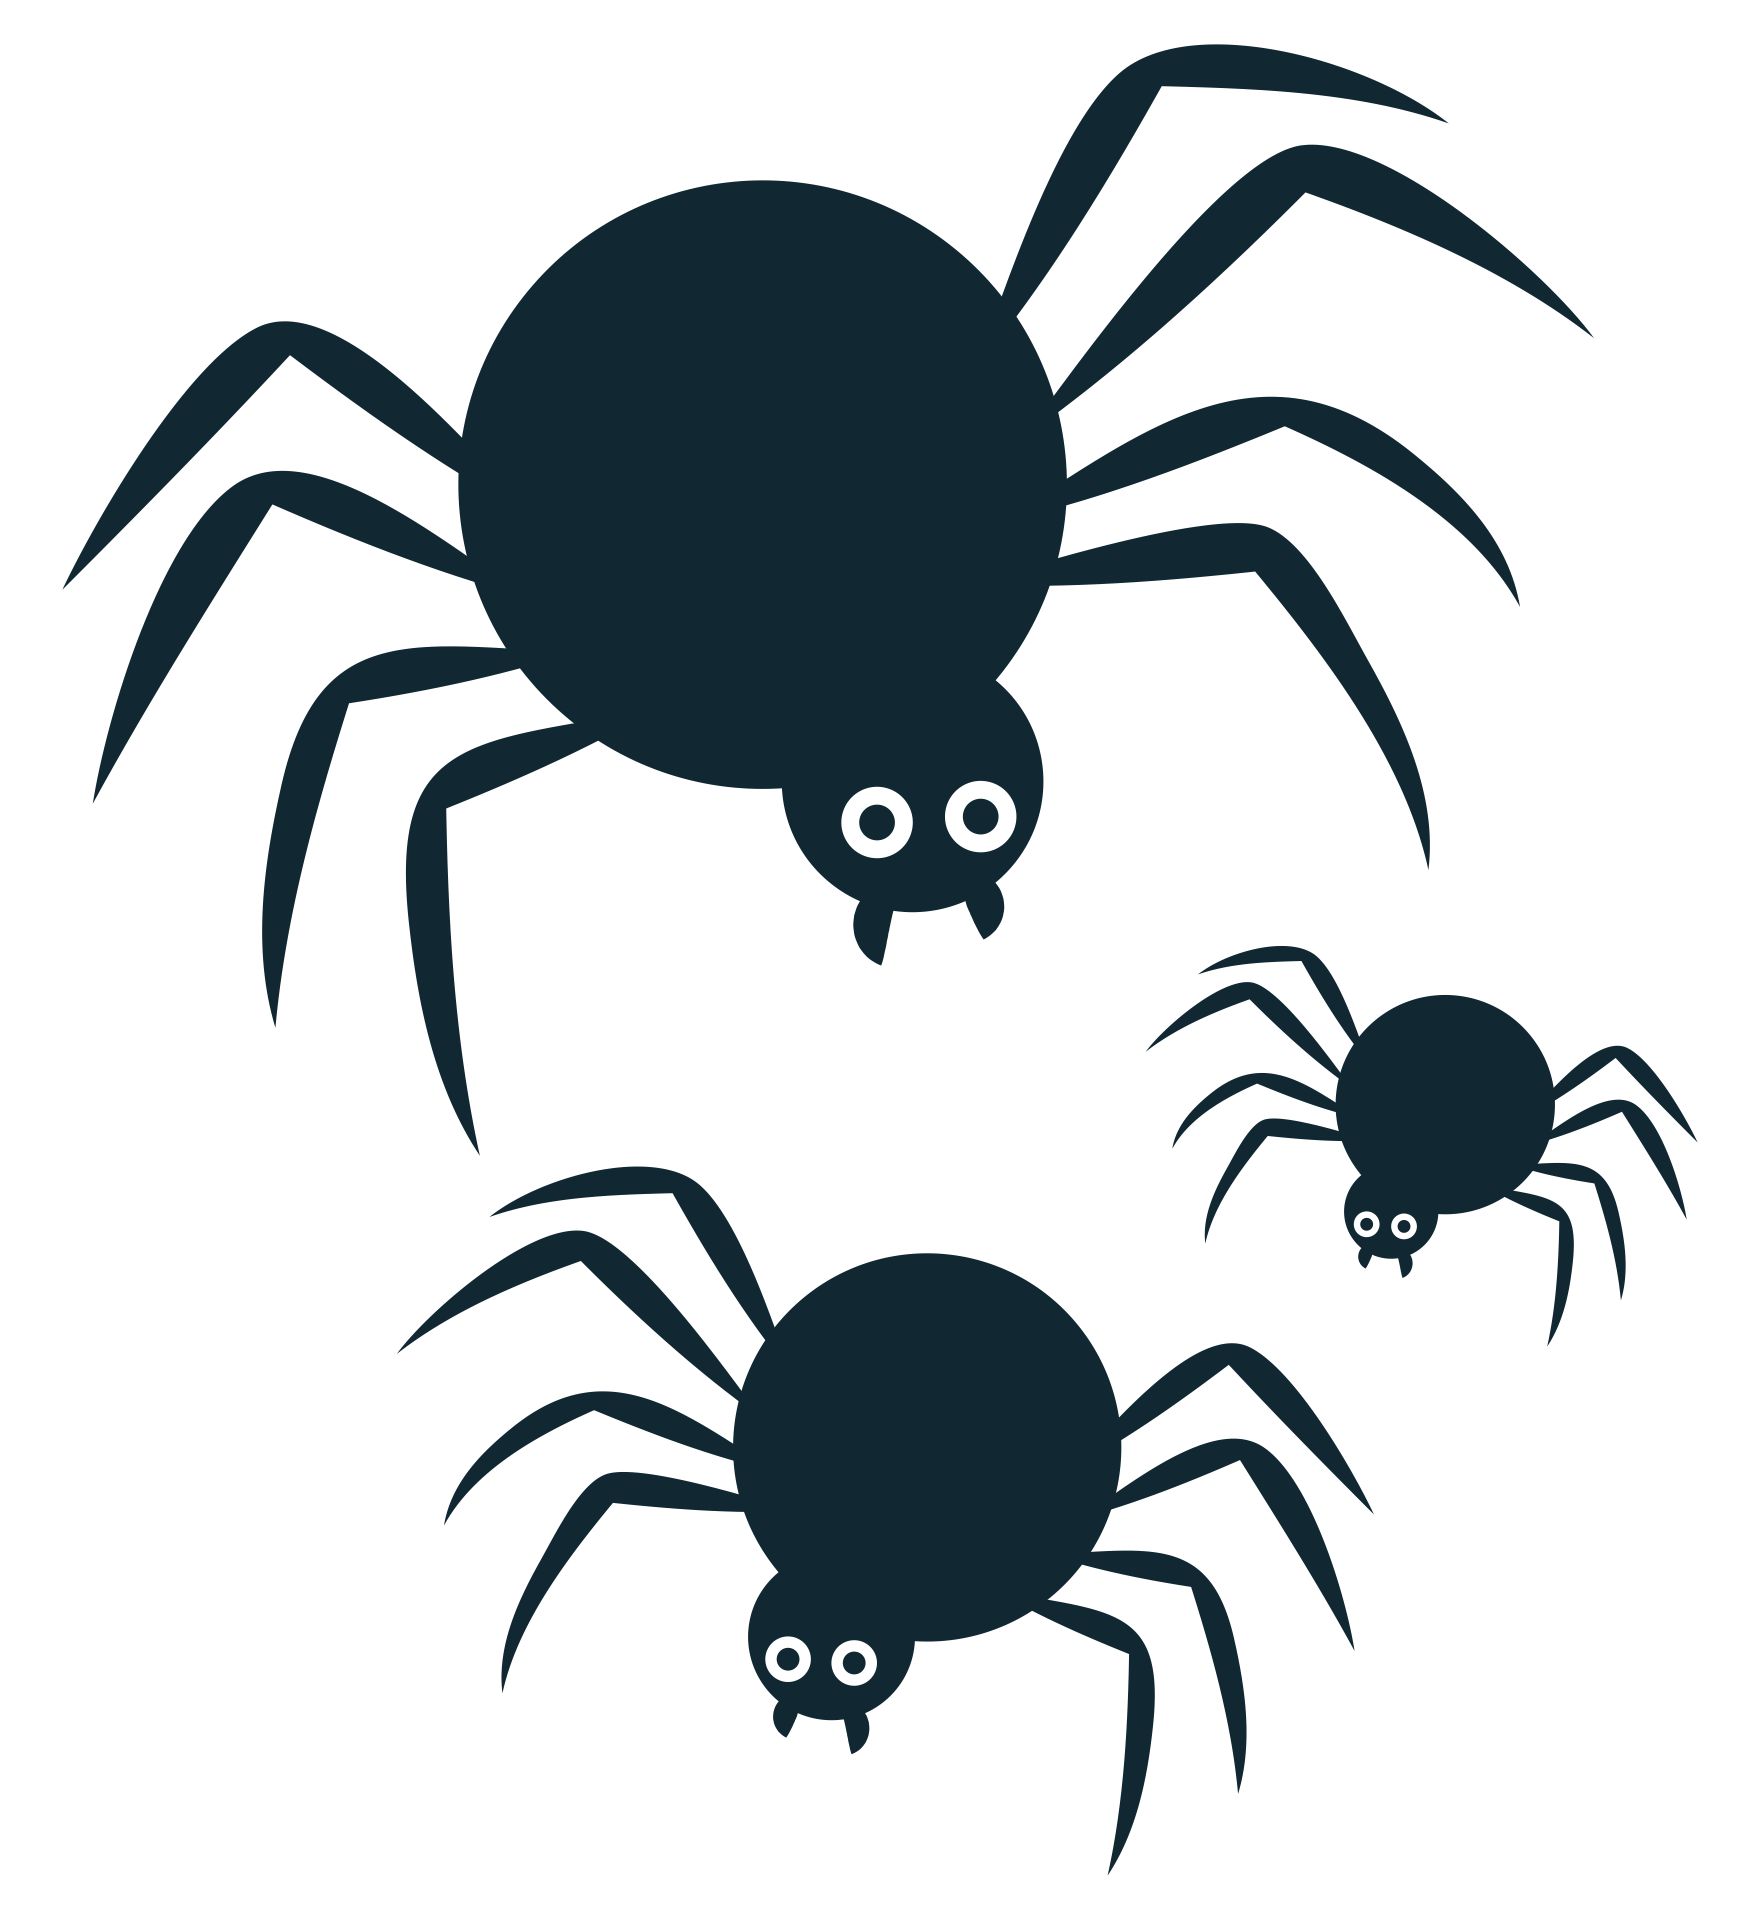 Large Outdoor Spiders For Halloween